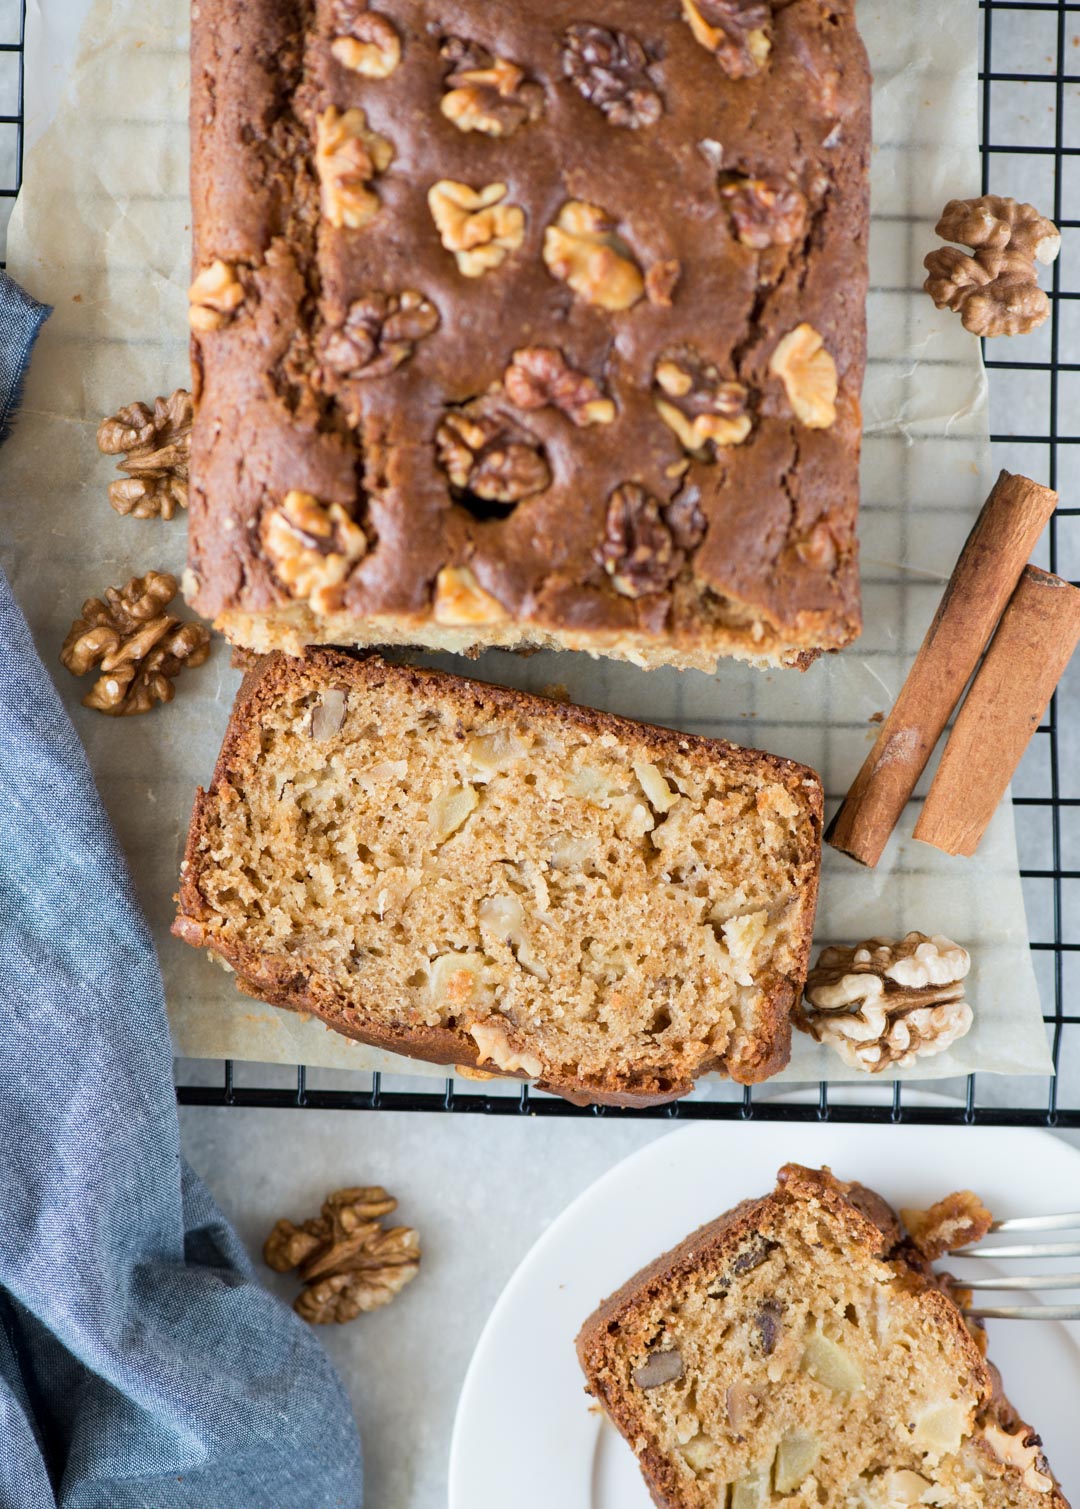 Moist Apple Cake recipe with oil,yogurt, walnut is a perfect cake with your afternoon tea. With a hint of cinnamon, this cake has tender crumbs and chunks of apple in every bite.